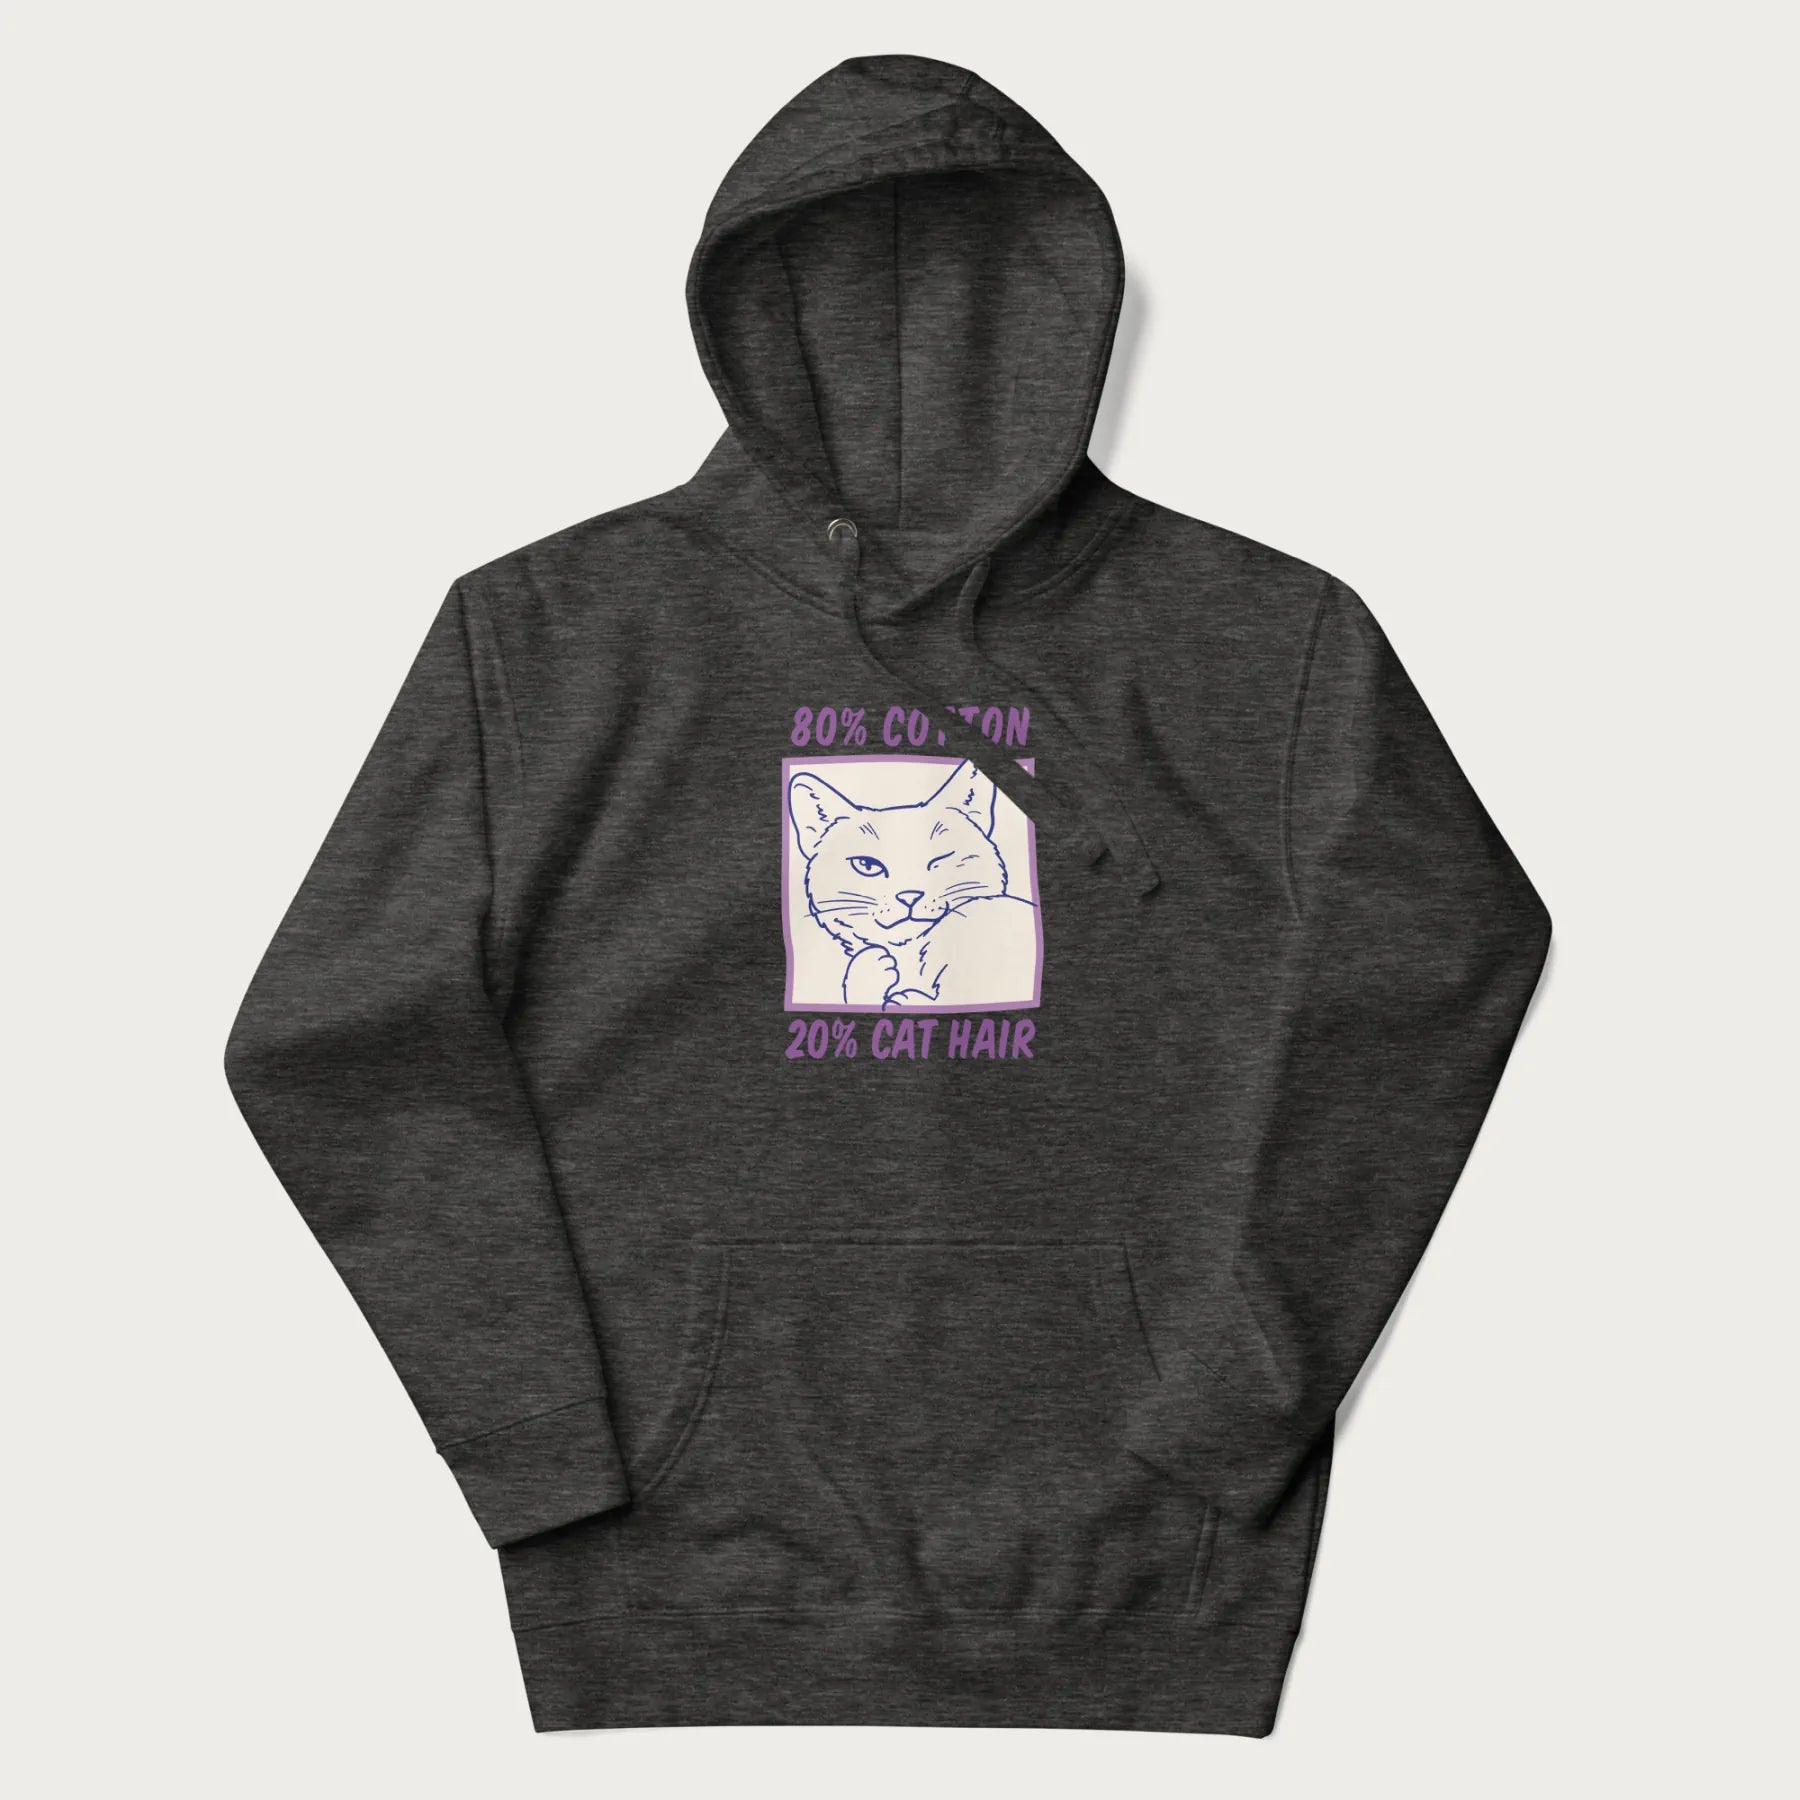 Dark grey hoodie with graphic of a winking cat with the text "80% cotton 20% cat hair".